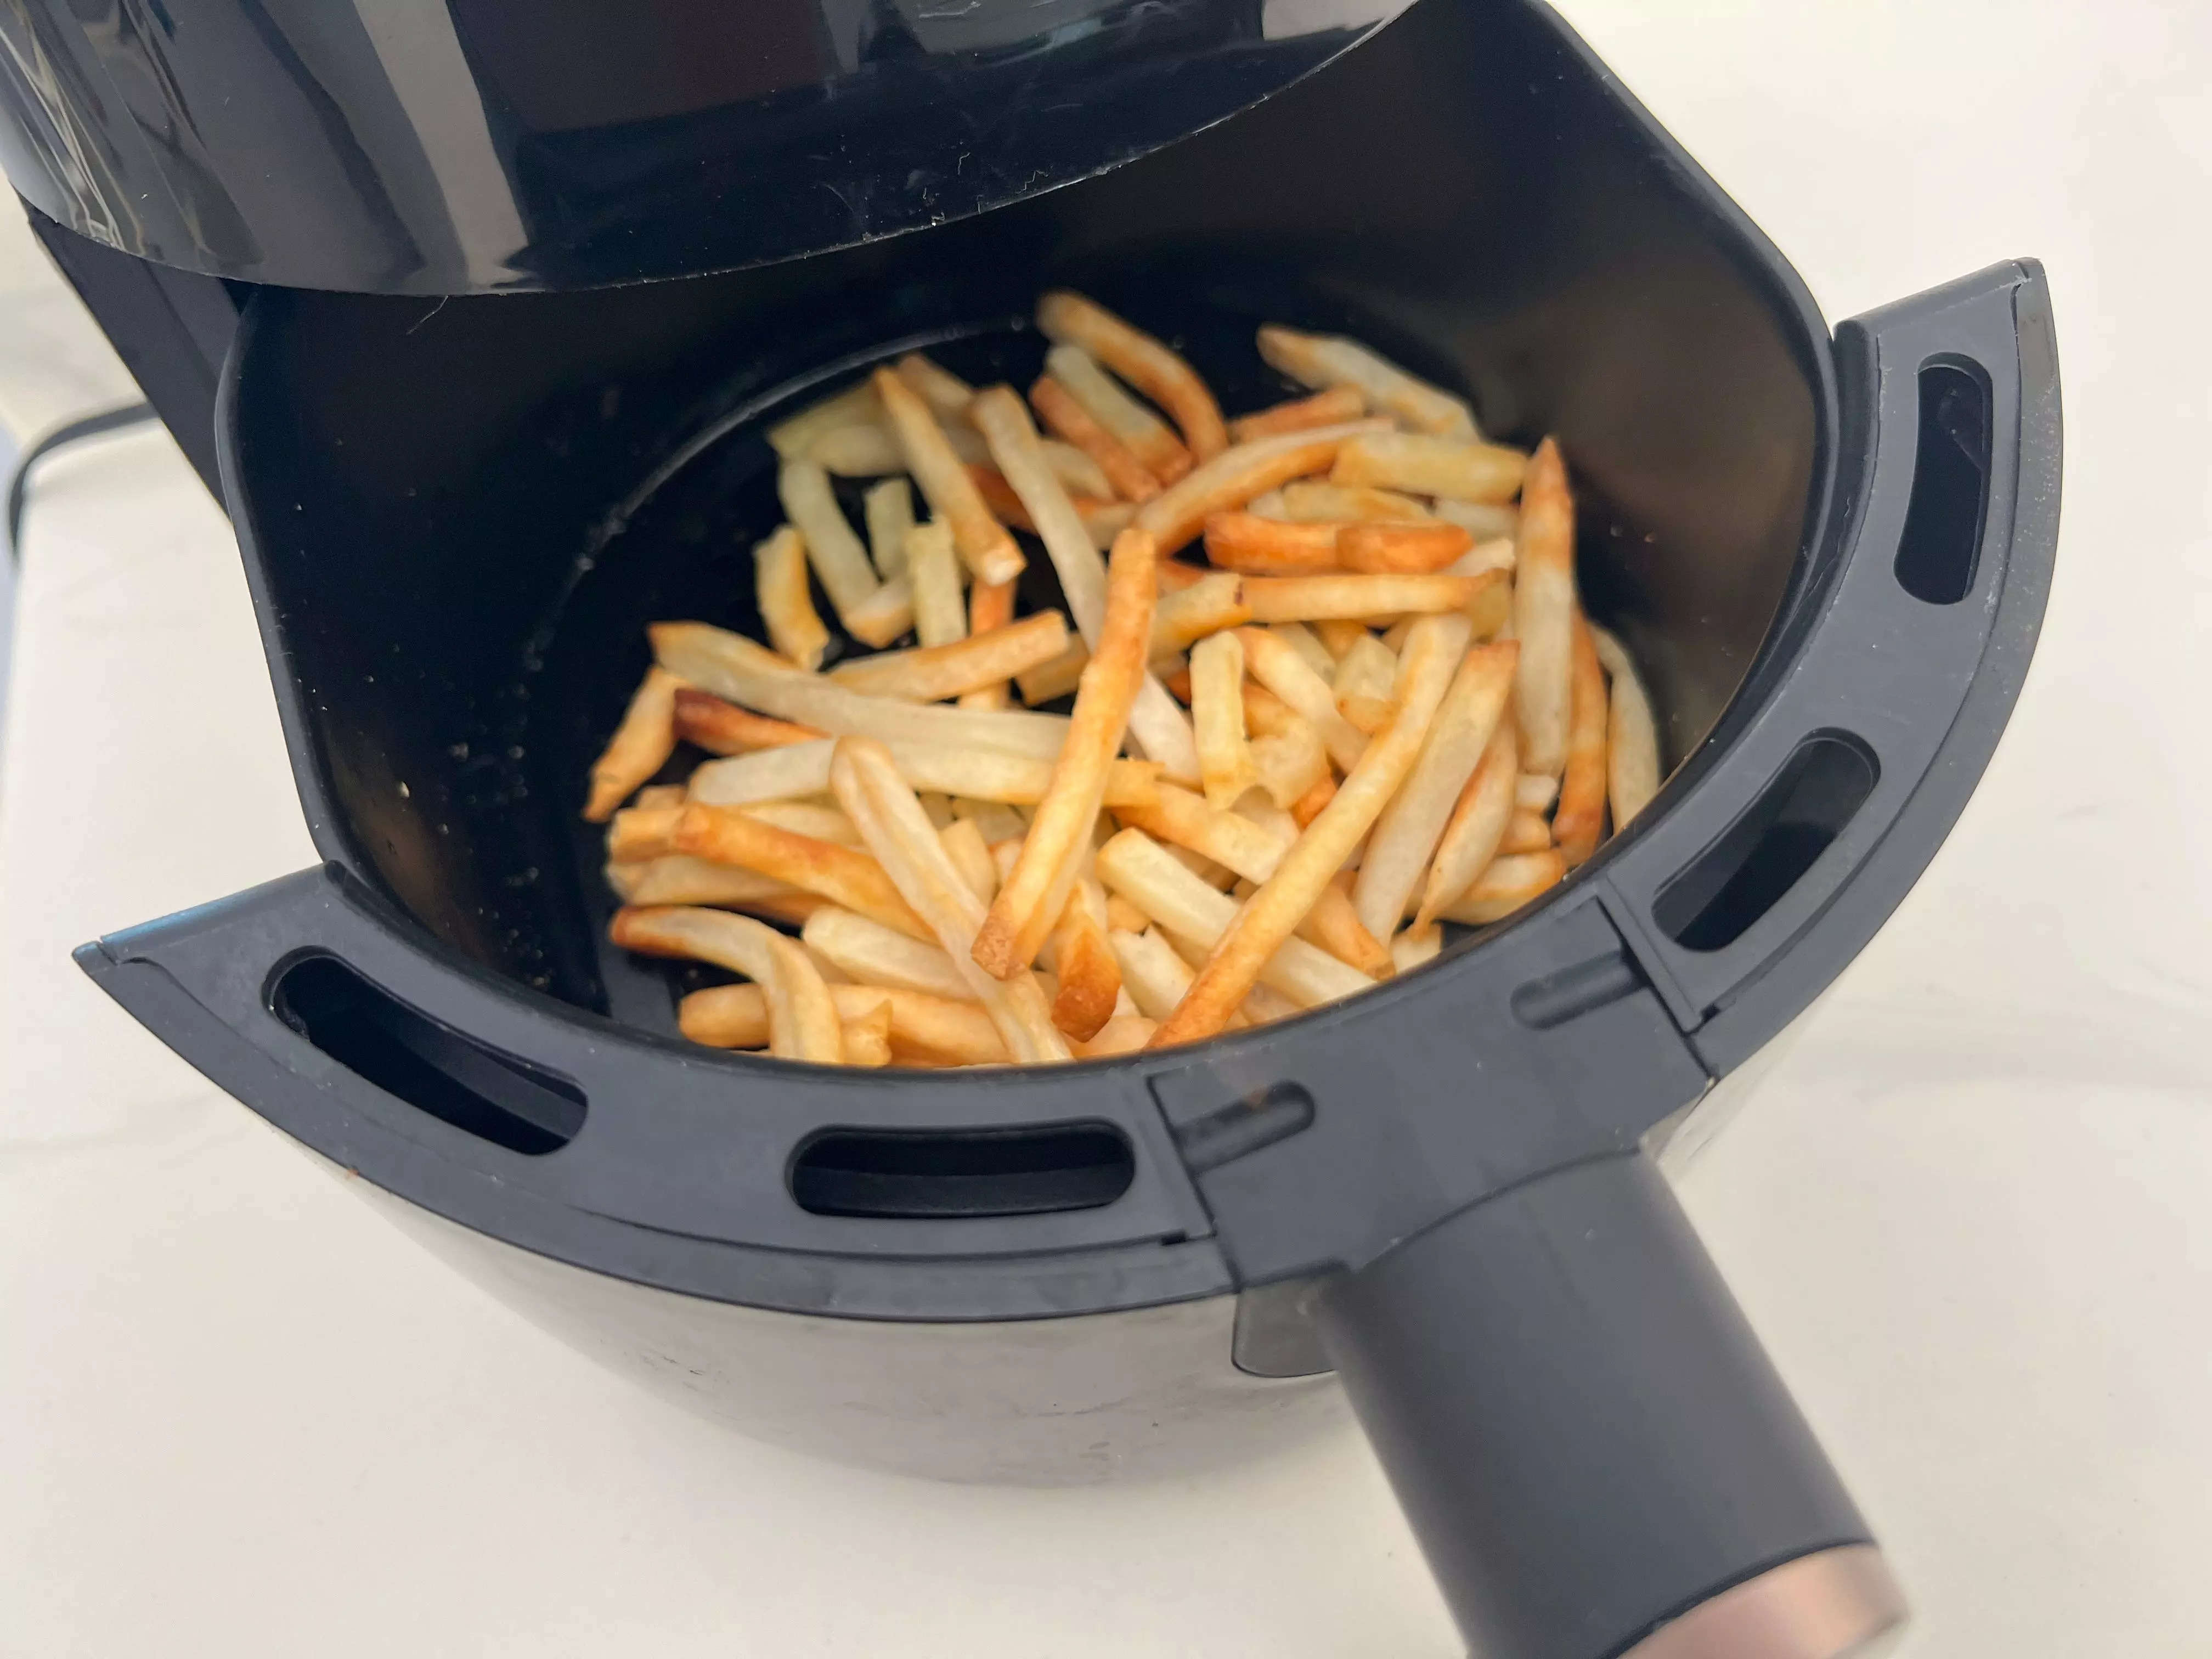 s decimated the price of this dual basket air fryer